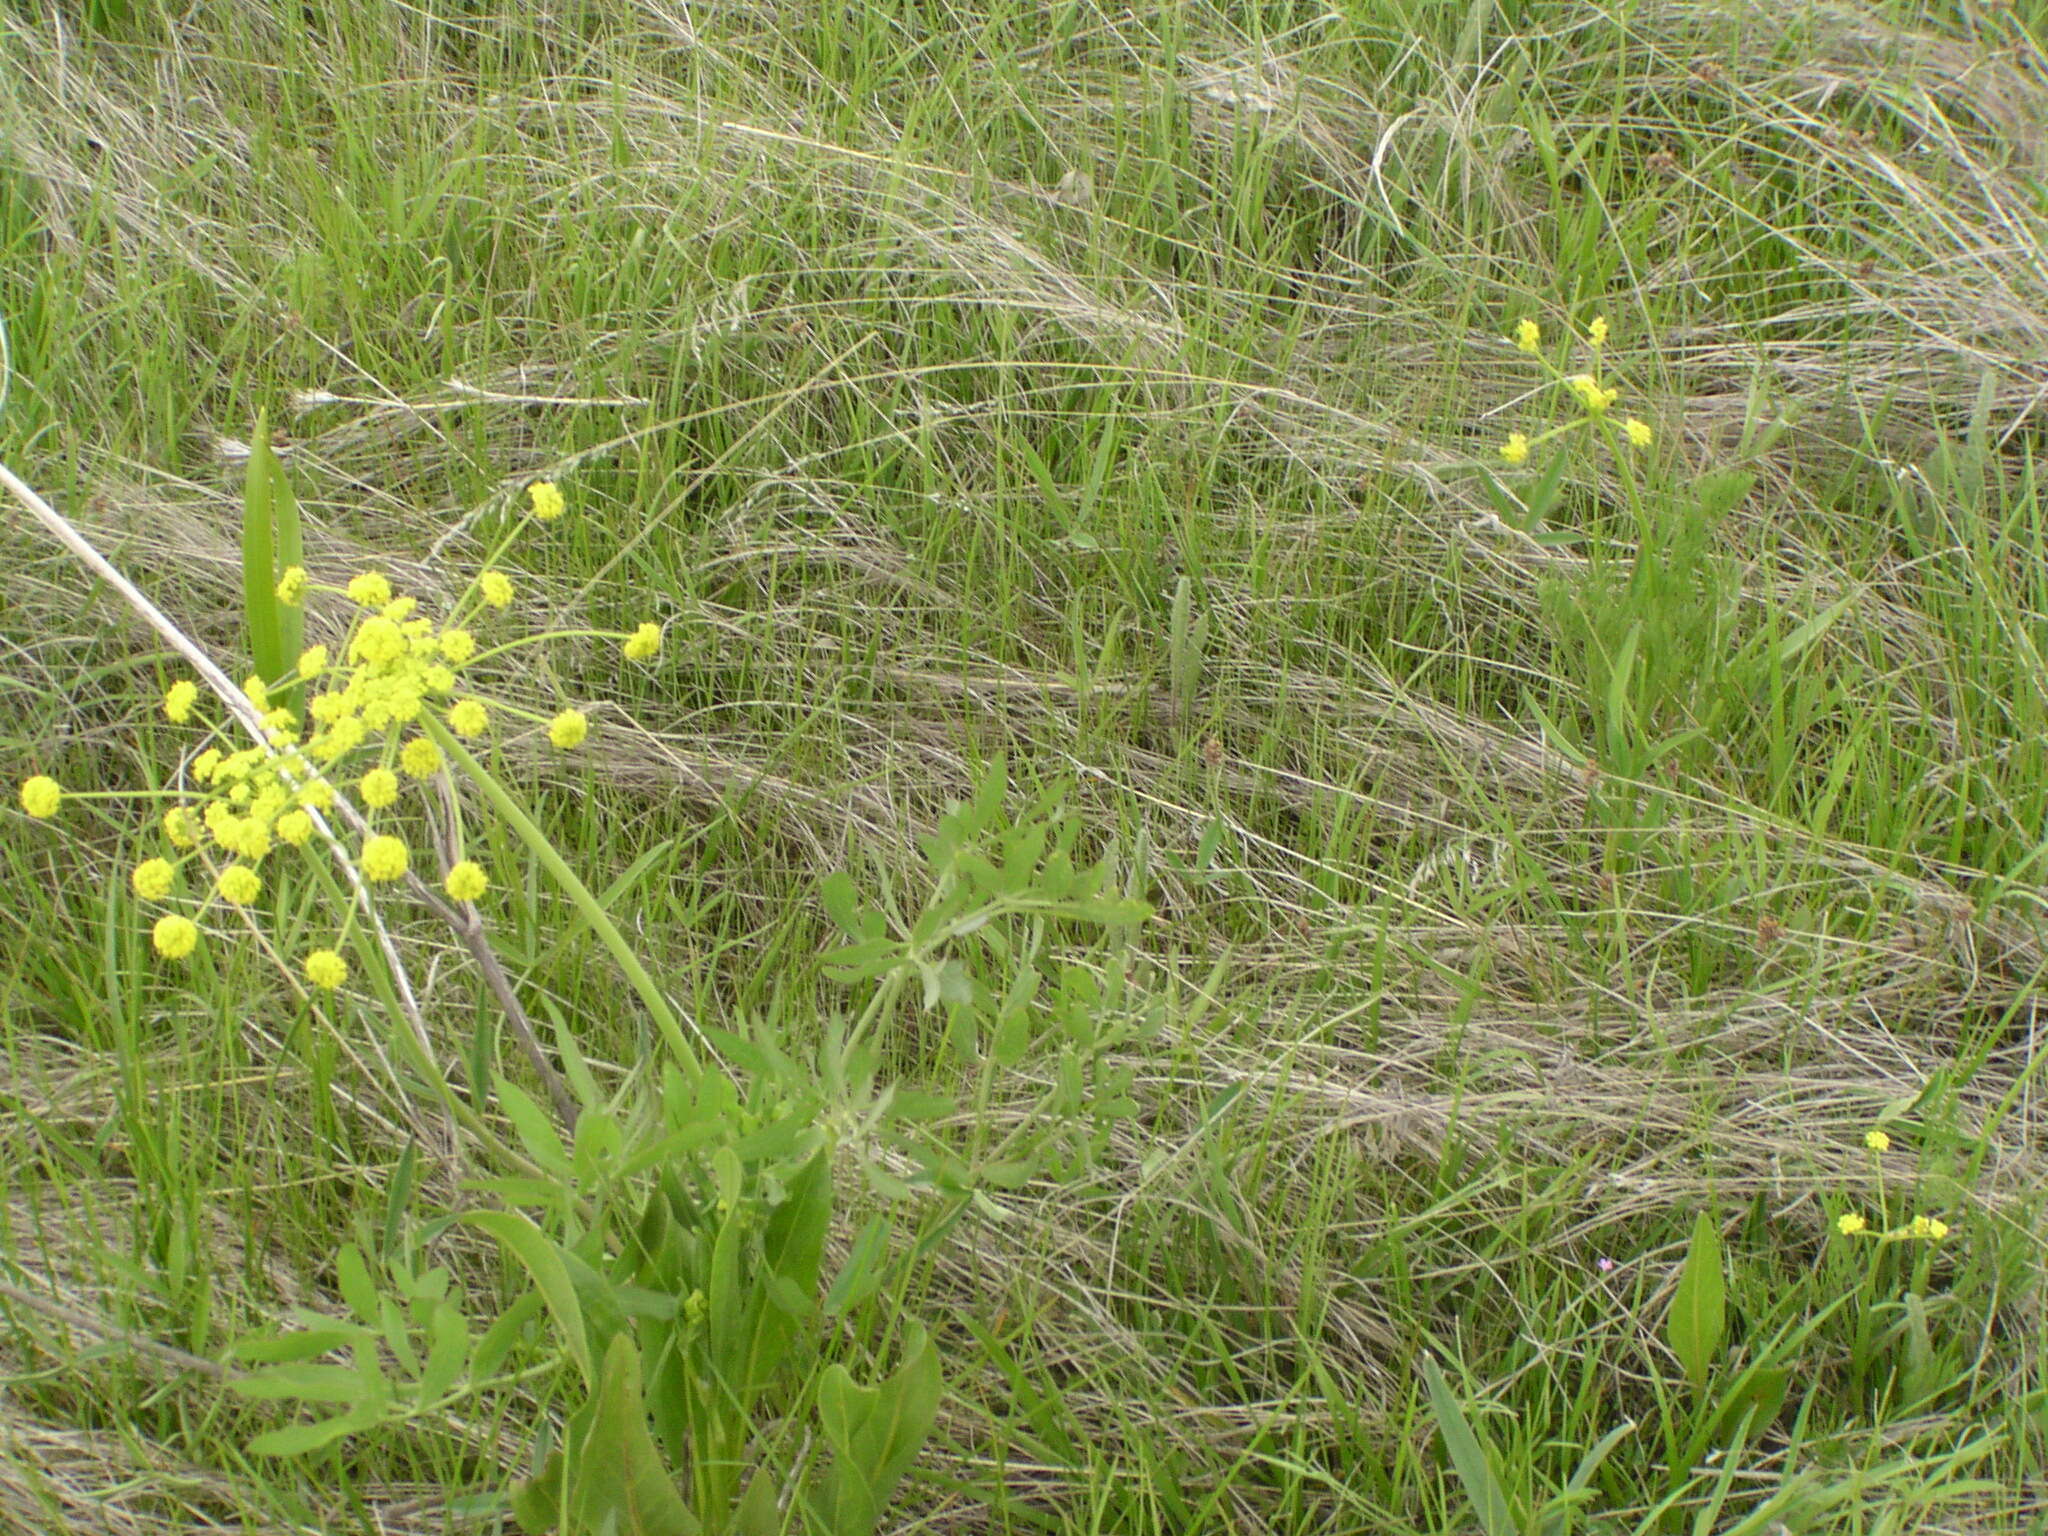 Image of leafy wildparsley